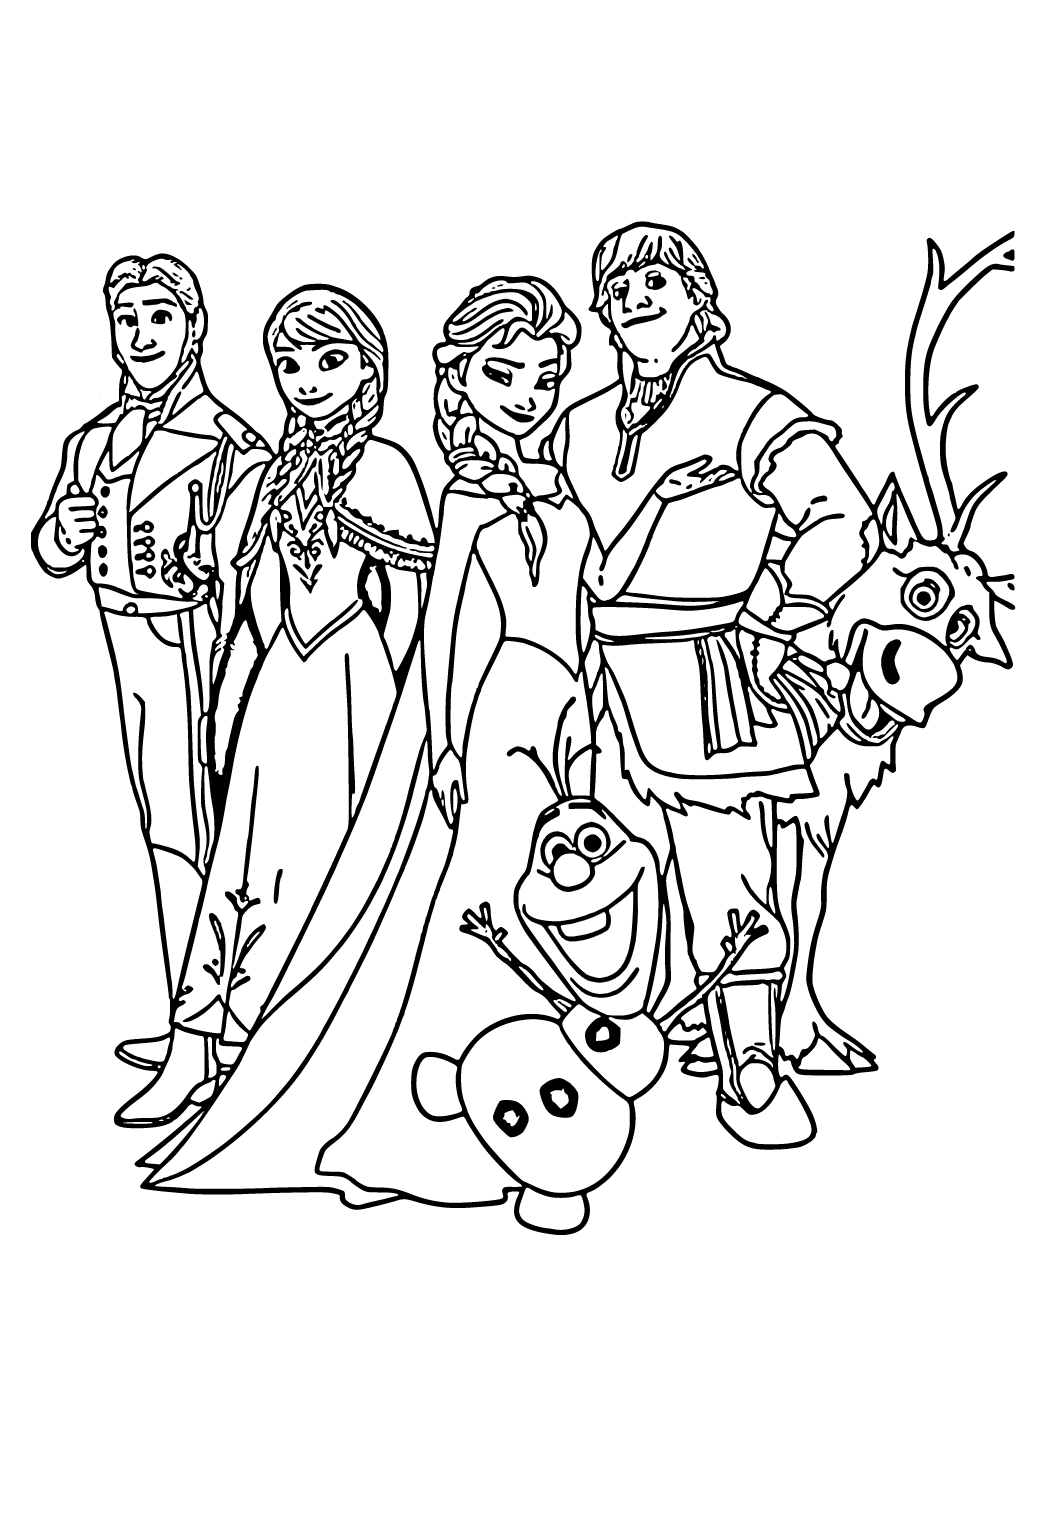 frozen easter coloring pages